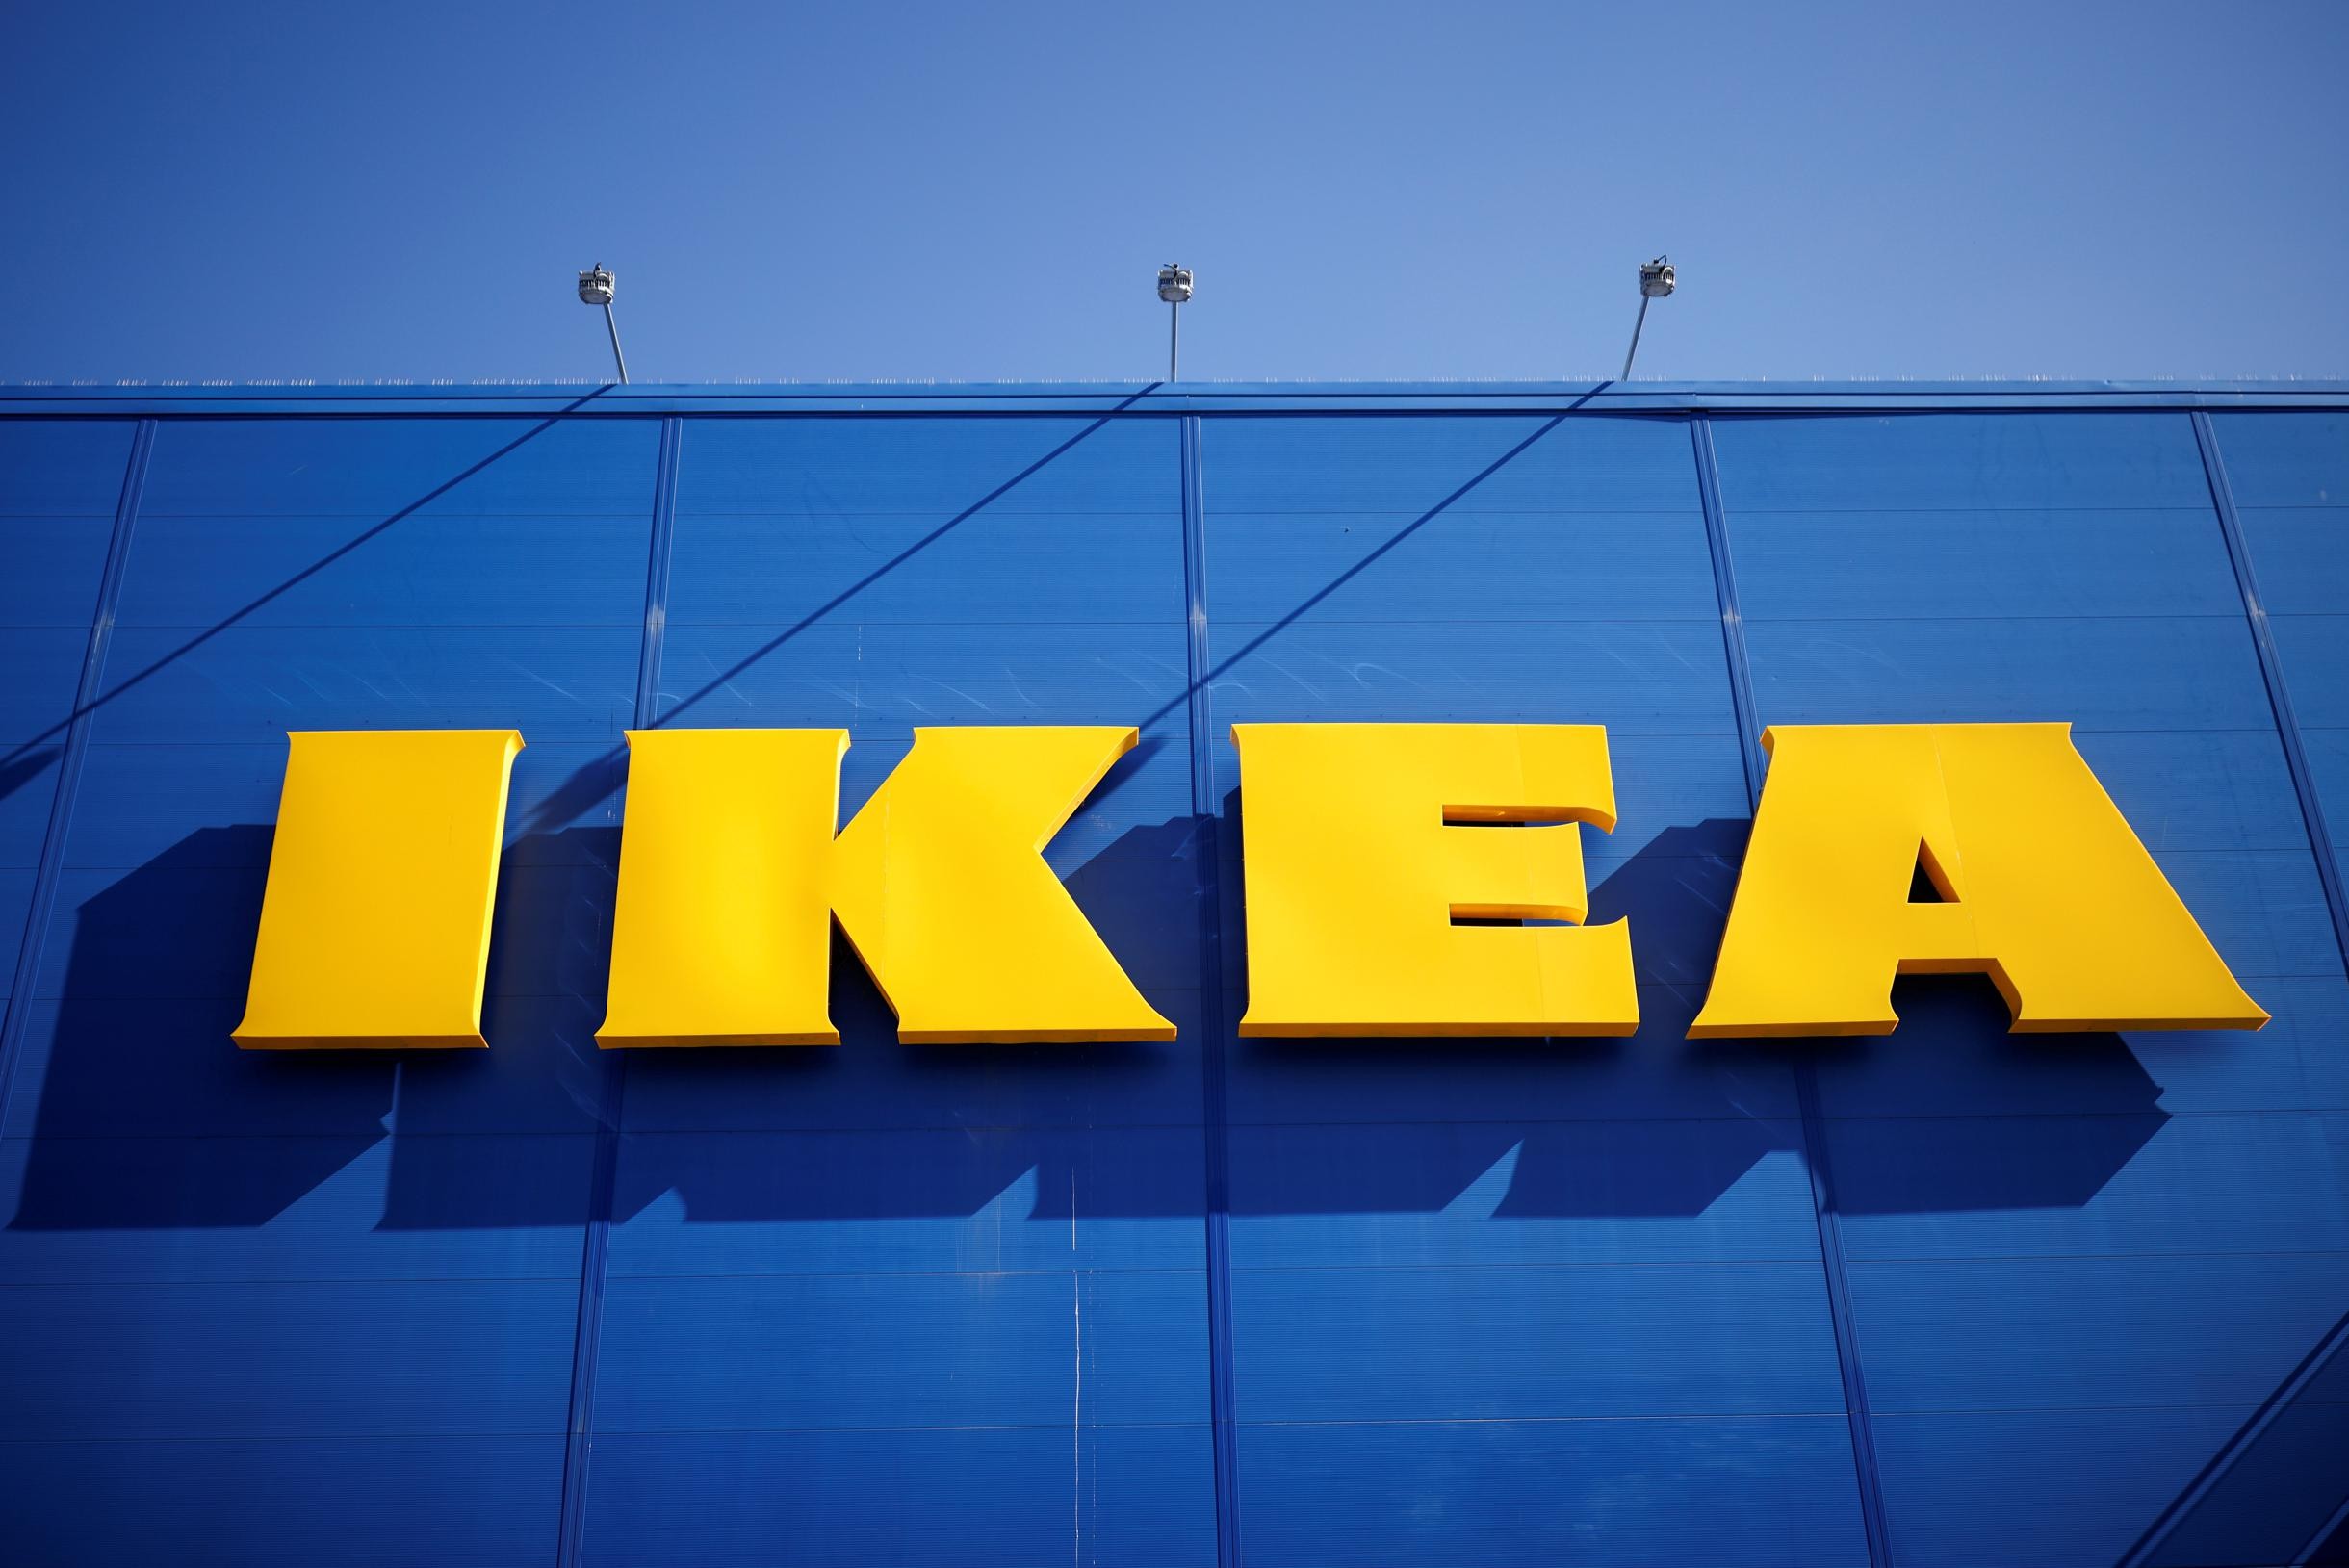 Over a 2.50 euro lunch voucher, an Ikea employee was wrongfully sacked